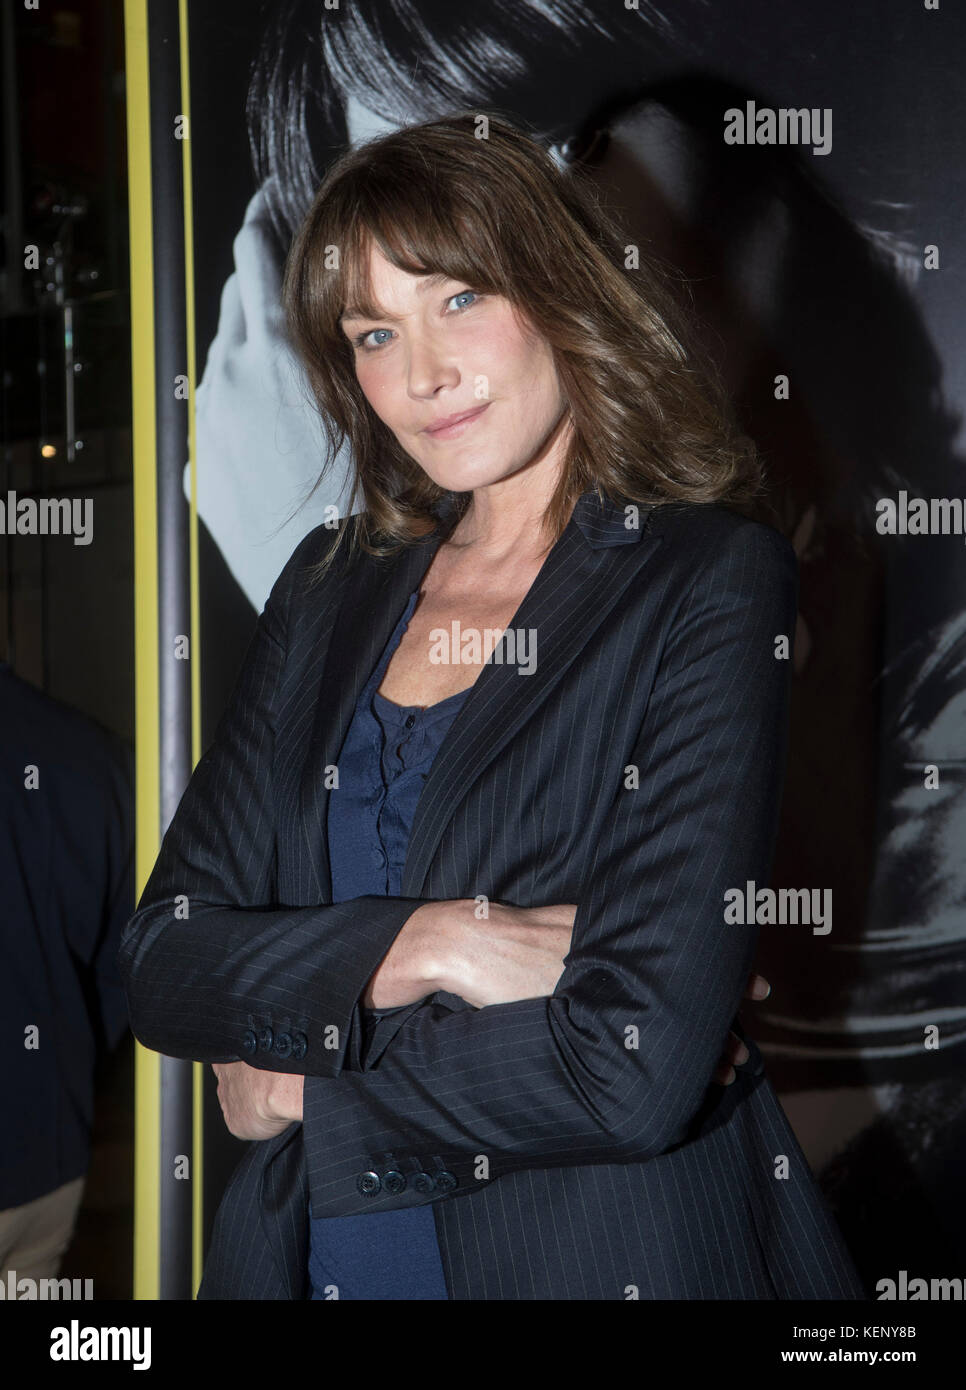 Athens, Greece. 22nd Oct., 2017. Carla Bruni, singer and former French first lady arrives at the Pallas Theater in Athens, Greece, 22 October 2017. Bruni began a world tour to promote her new album 'French Touch' in Athens. She will give two concerts at the Pallas Theater on 23 and 24 October. ©Elias Verdi/Alamy Live News Stock Photo